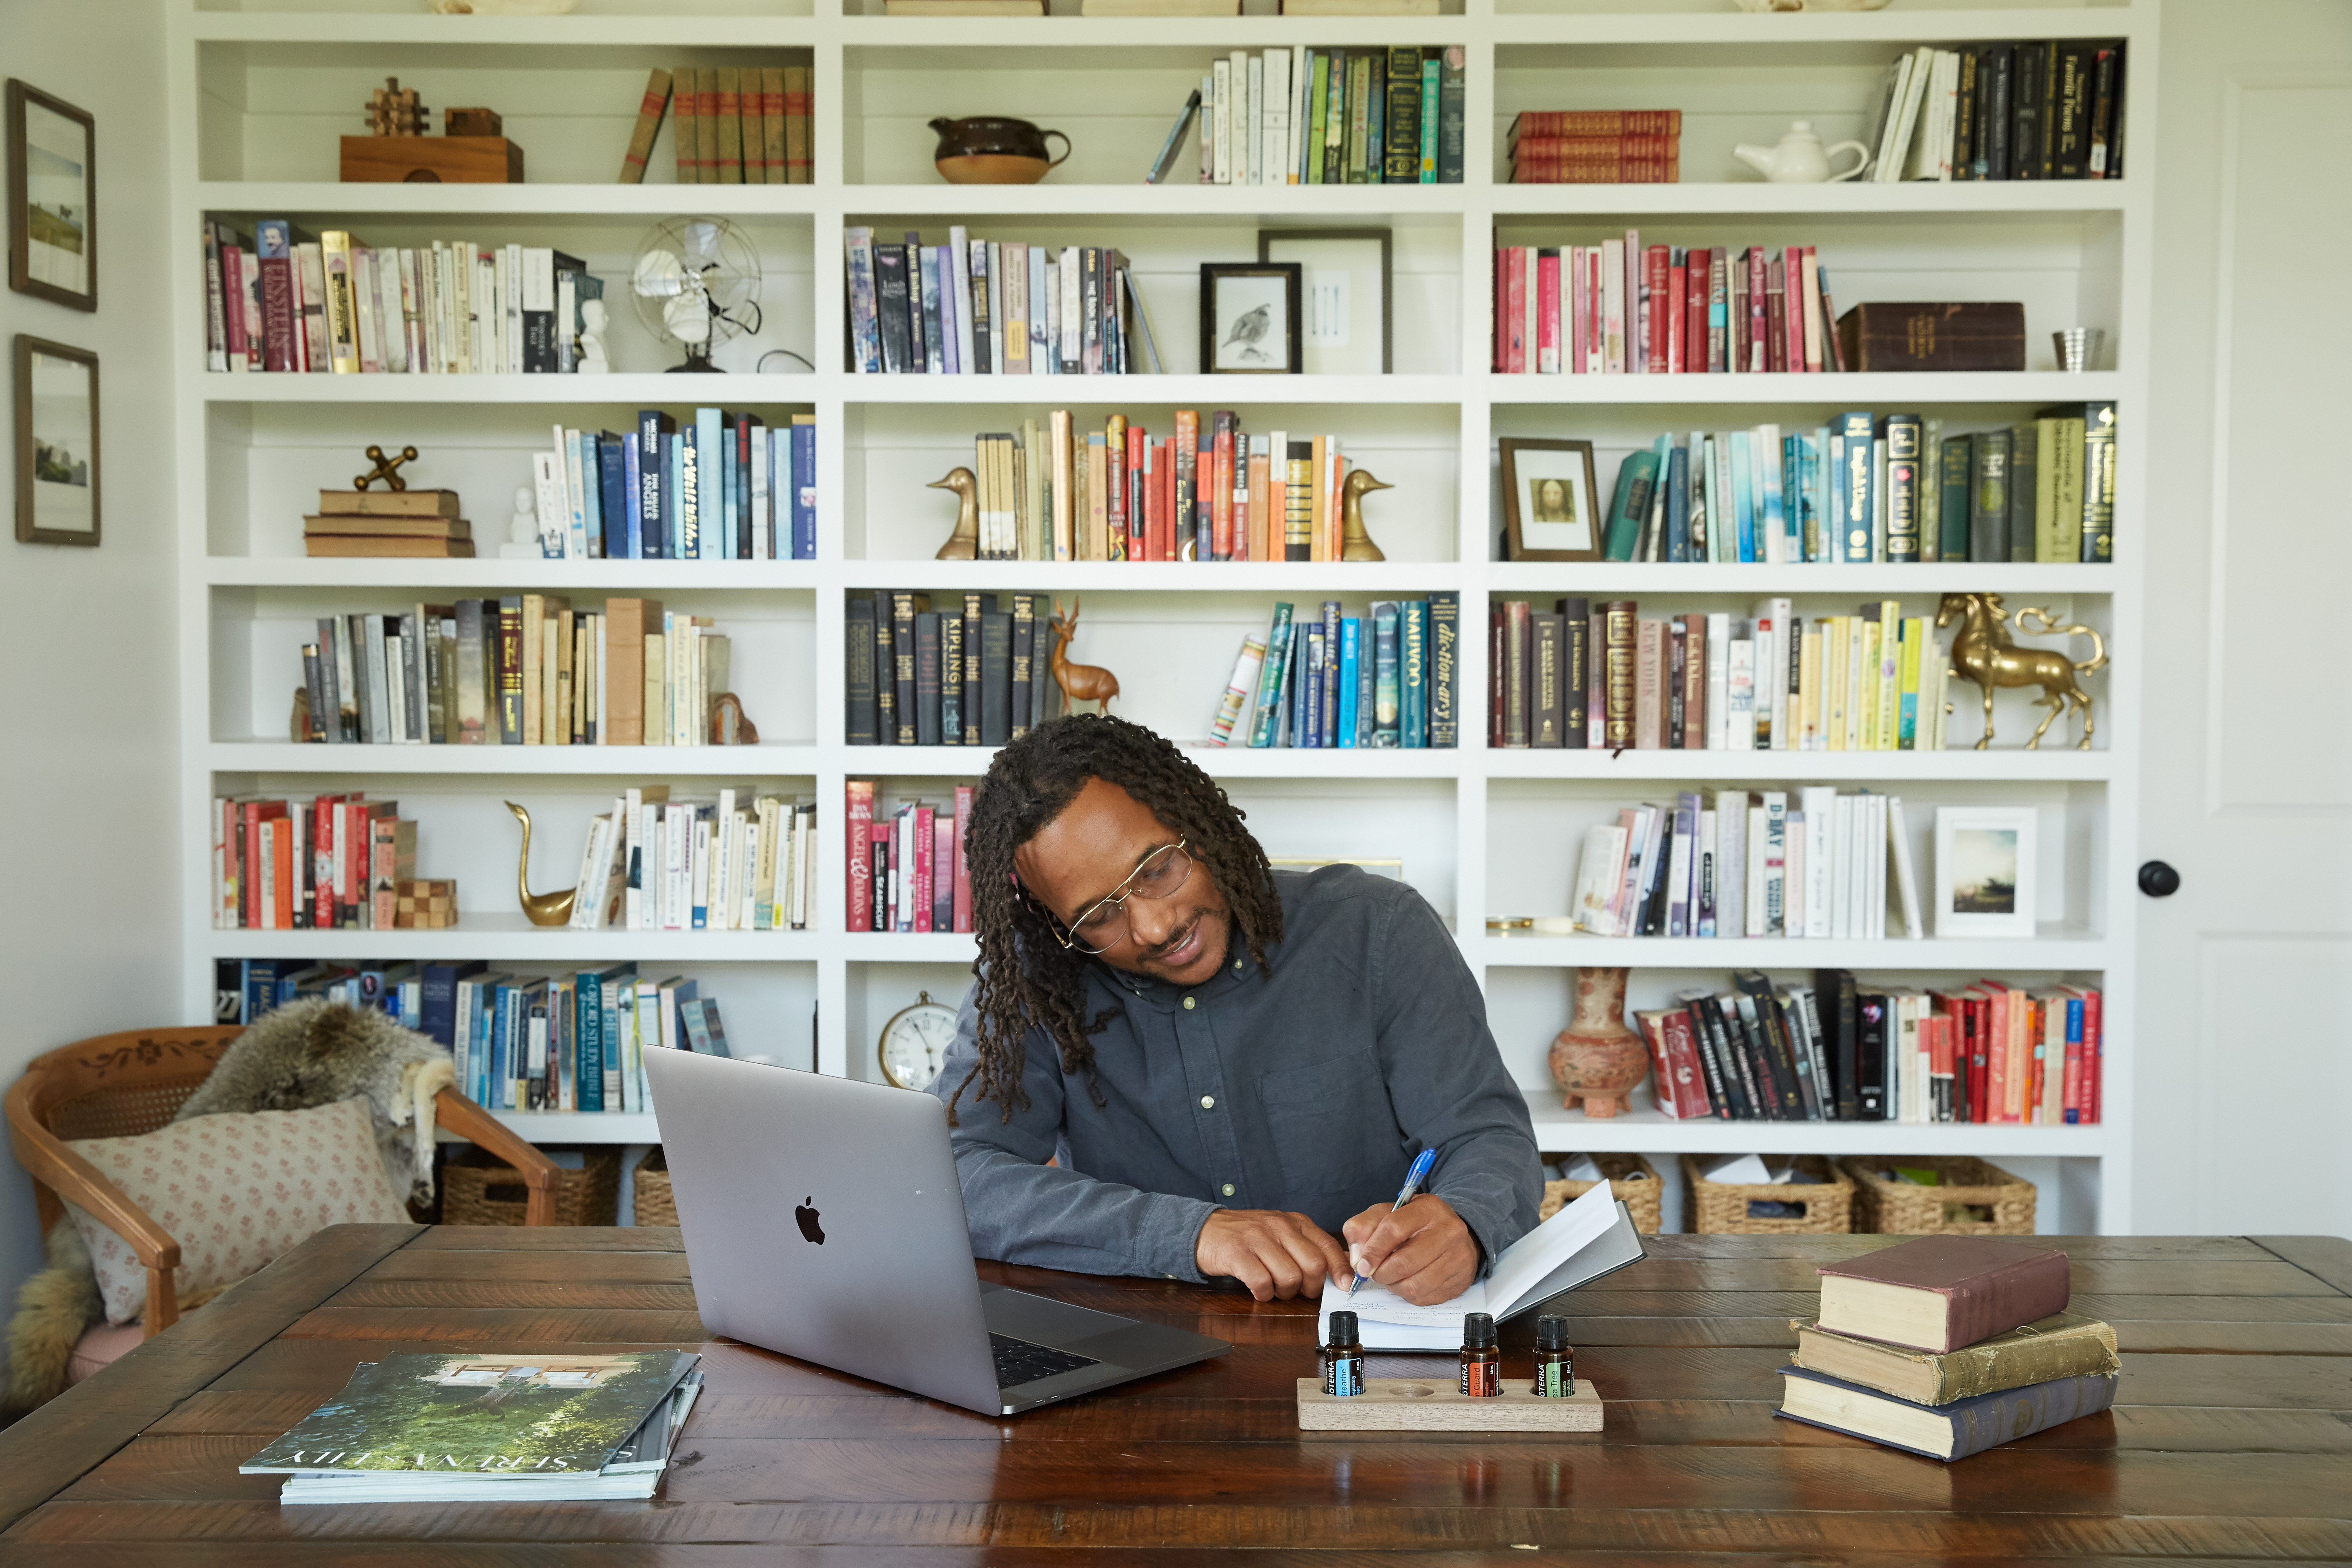 A man sitting at a desk with a laptop in front of a bookshelf